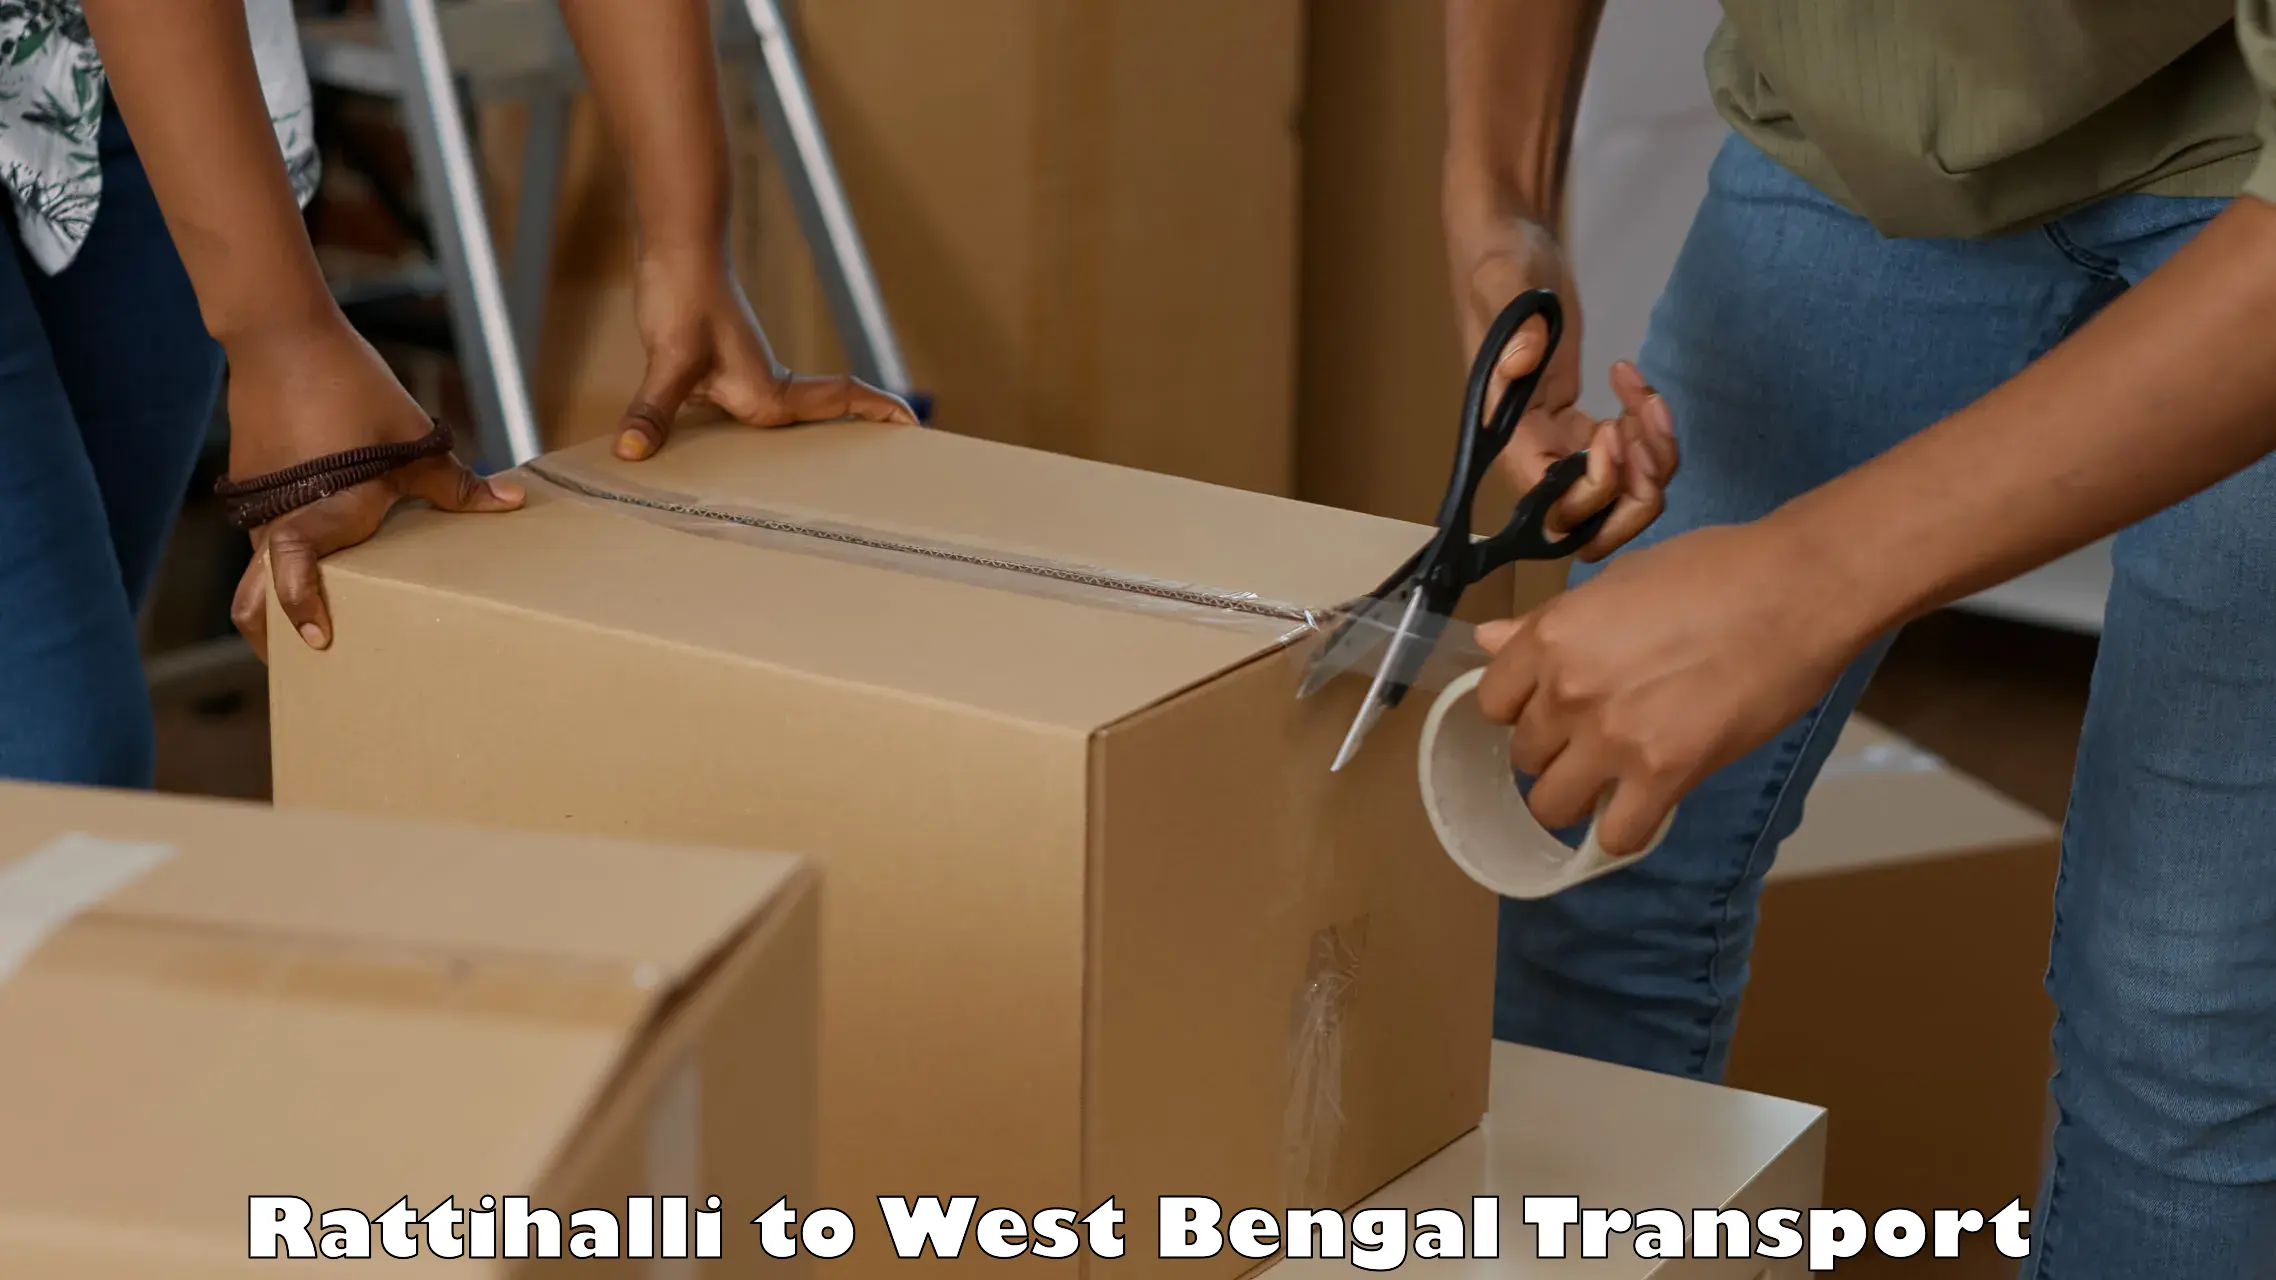 Container transport service Rattihalli to West Bengal